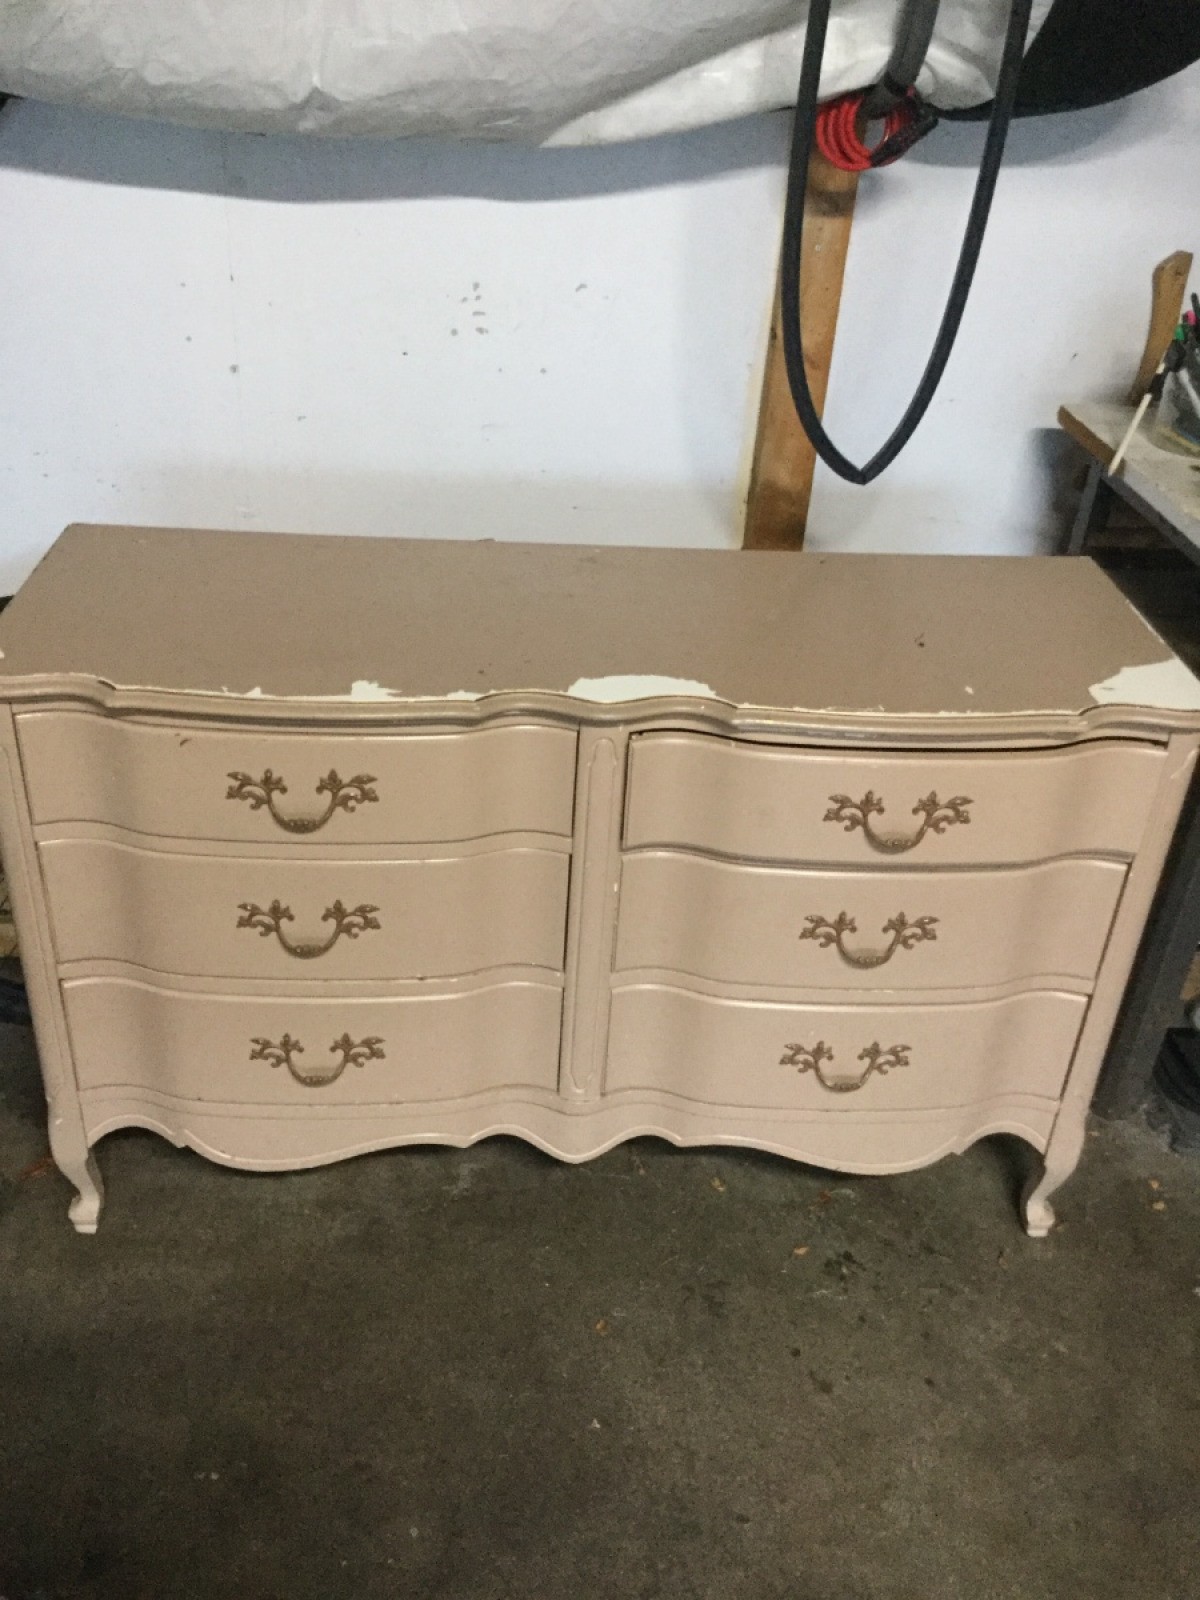 Age And Value Of A Johnson Carper, Bassett Furniture French Provincial Dresser